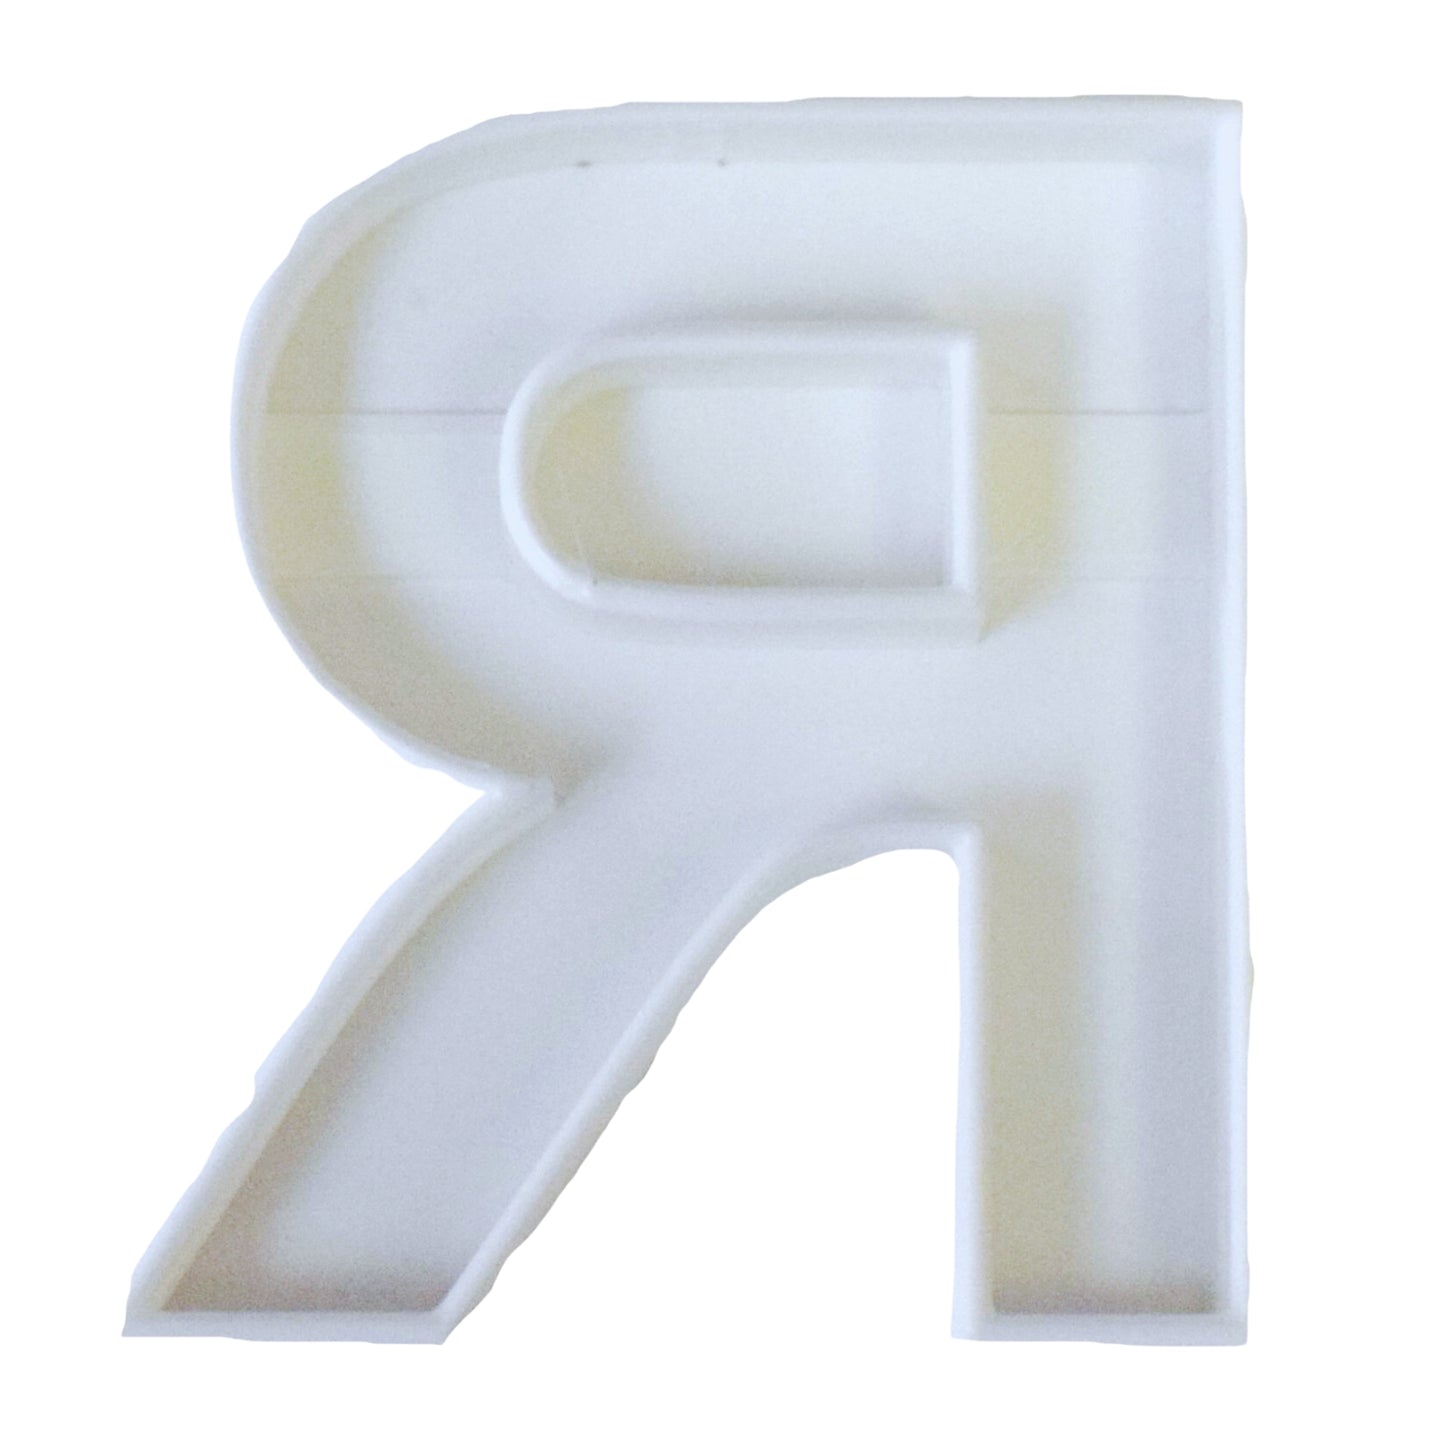 Letter R Initial Alphabet Letters Cookie Cutter Baking Tool USA PR107R